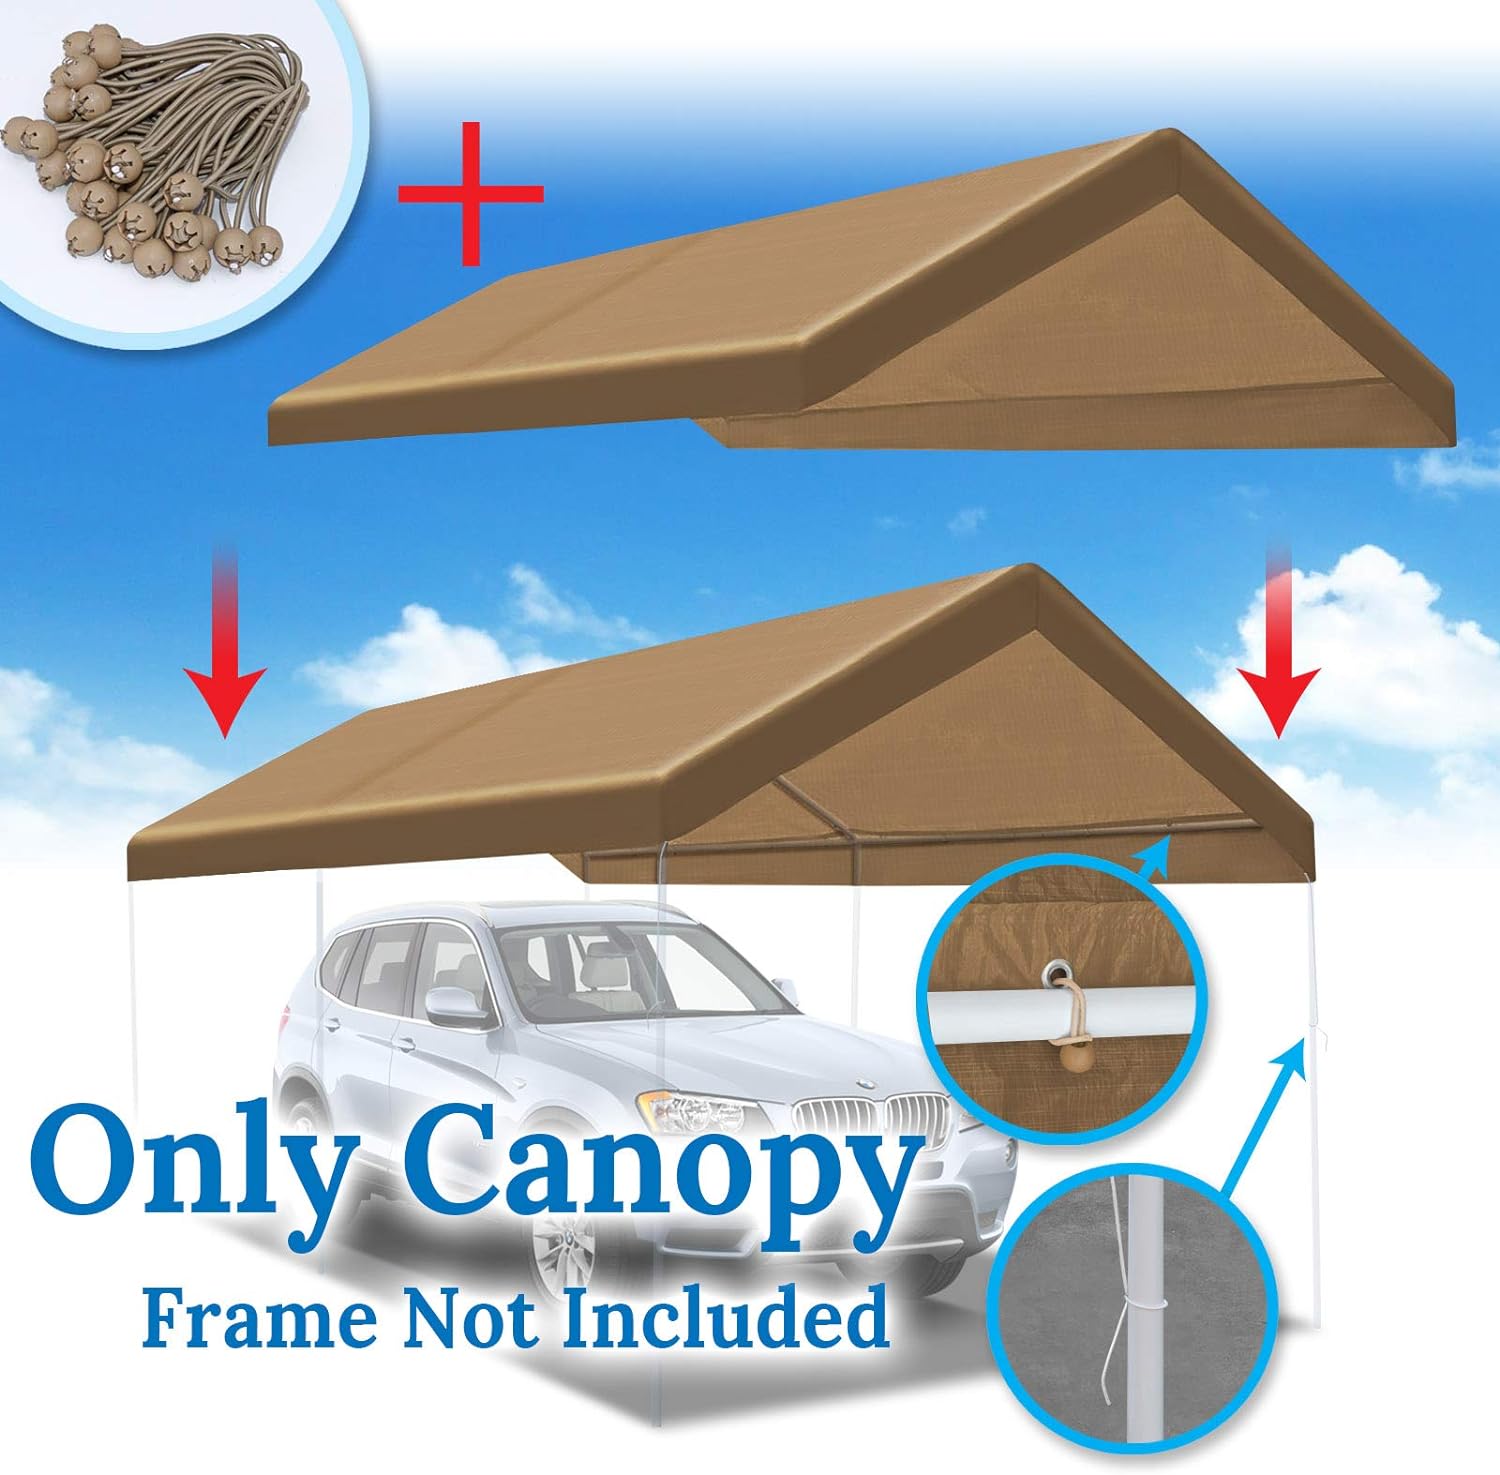 Benefit-USA BenefitUSA Canopy ONLY 10'x20' Carport Replacement Canopy Outdoor Tent Garage Top Tarp Shelter Cover w Ball Bungees (Tan)